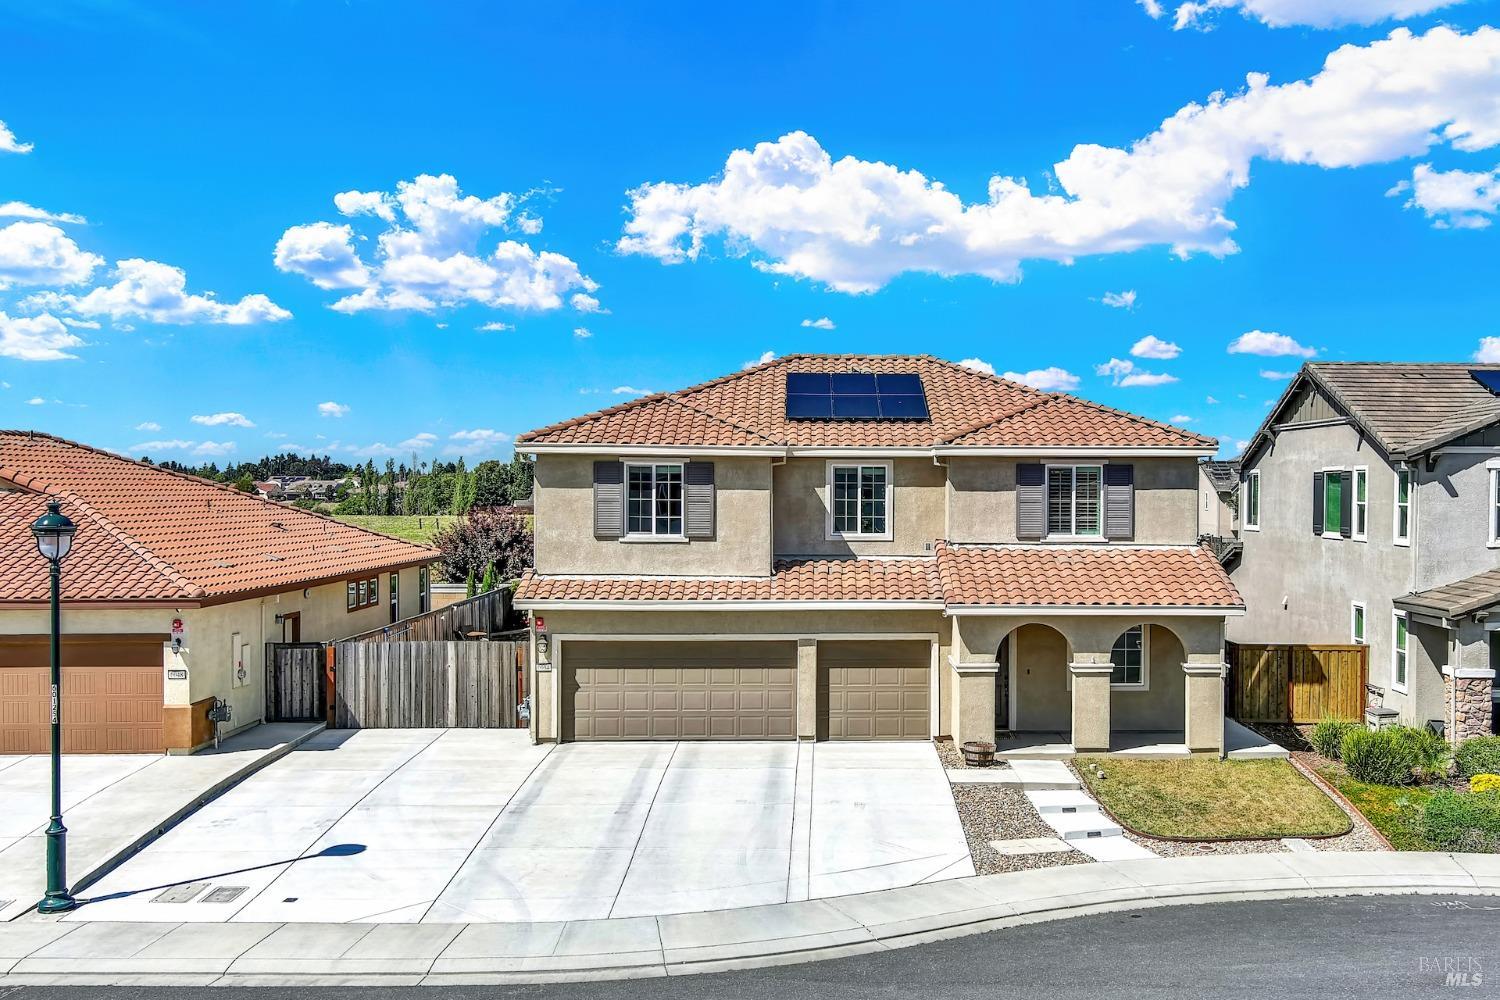 Photo of 6054 Tristen Ct in Vacaville, CA